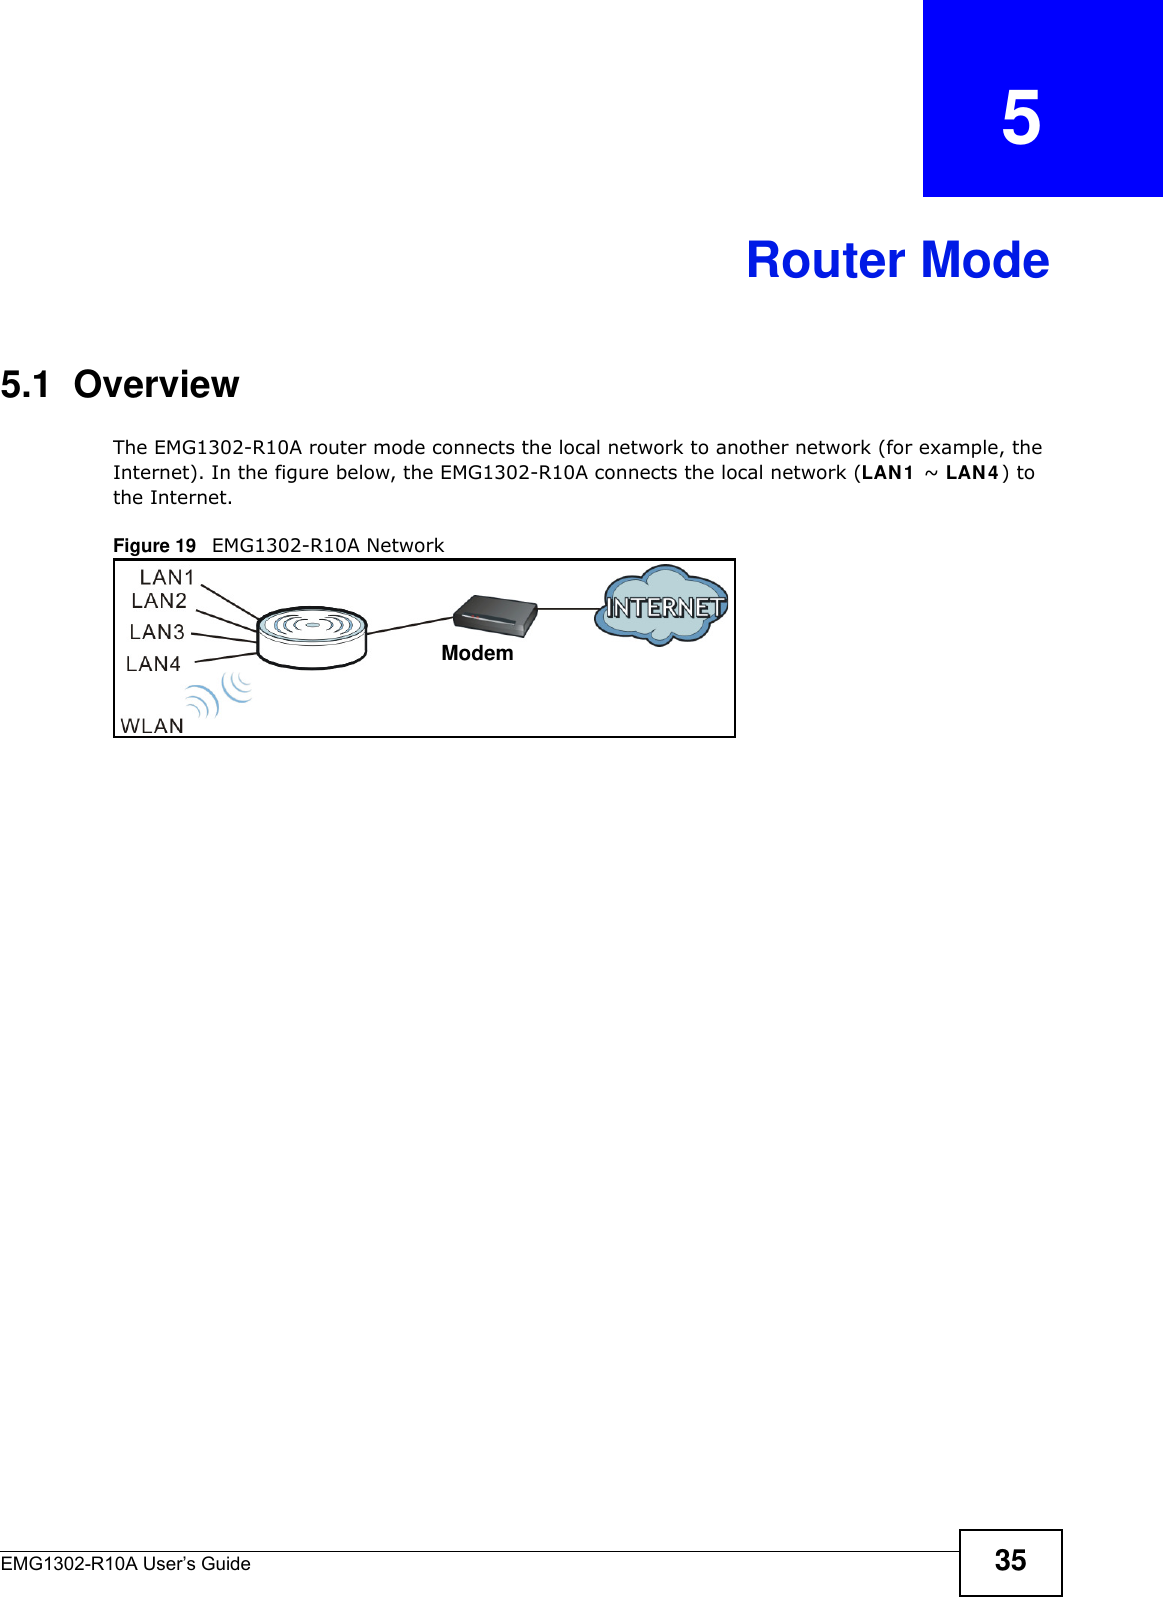 EMG1302-R10A User’s Guide 35CHAPTER   5Router Mode5.1  OverviewThe EMG1302-R10A router mode connects the local network to another network (for example, the Internet). In the figure below, the EMG1302-R10A connects the local network (LAN 1  ~ LAN 4 ) to the Internet.Figure 19   EMG1302-R10A NetworkModem